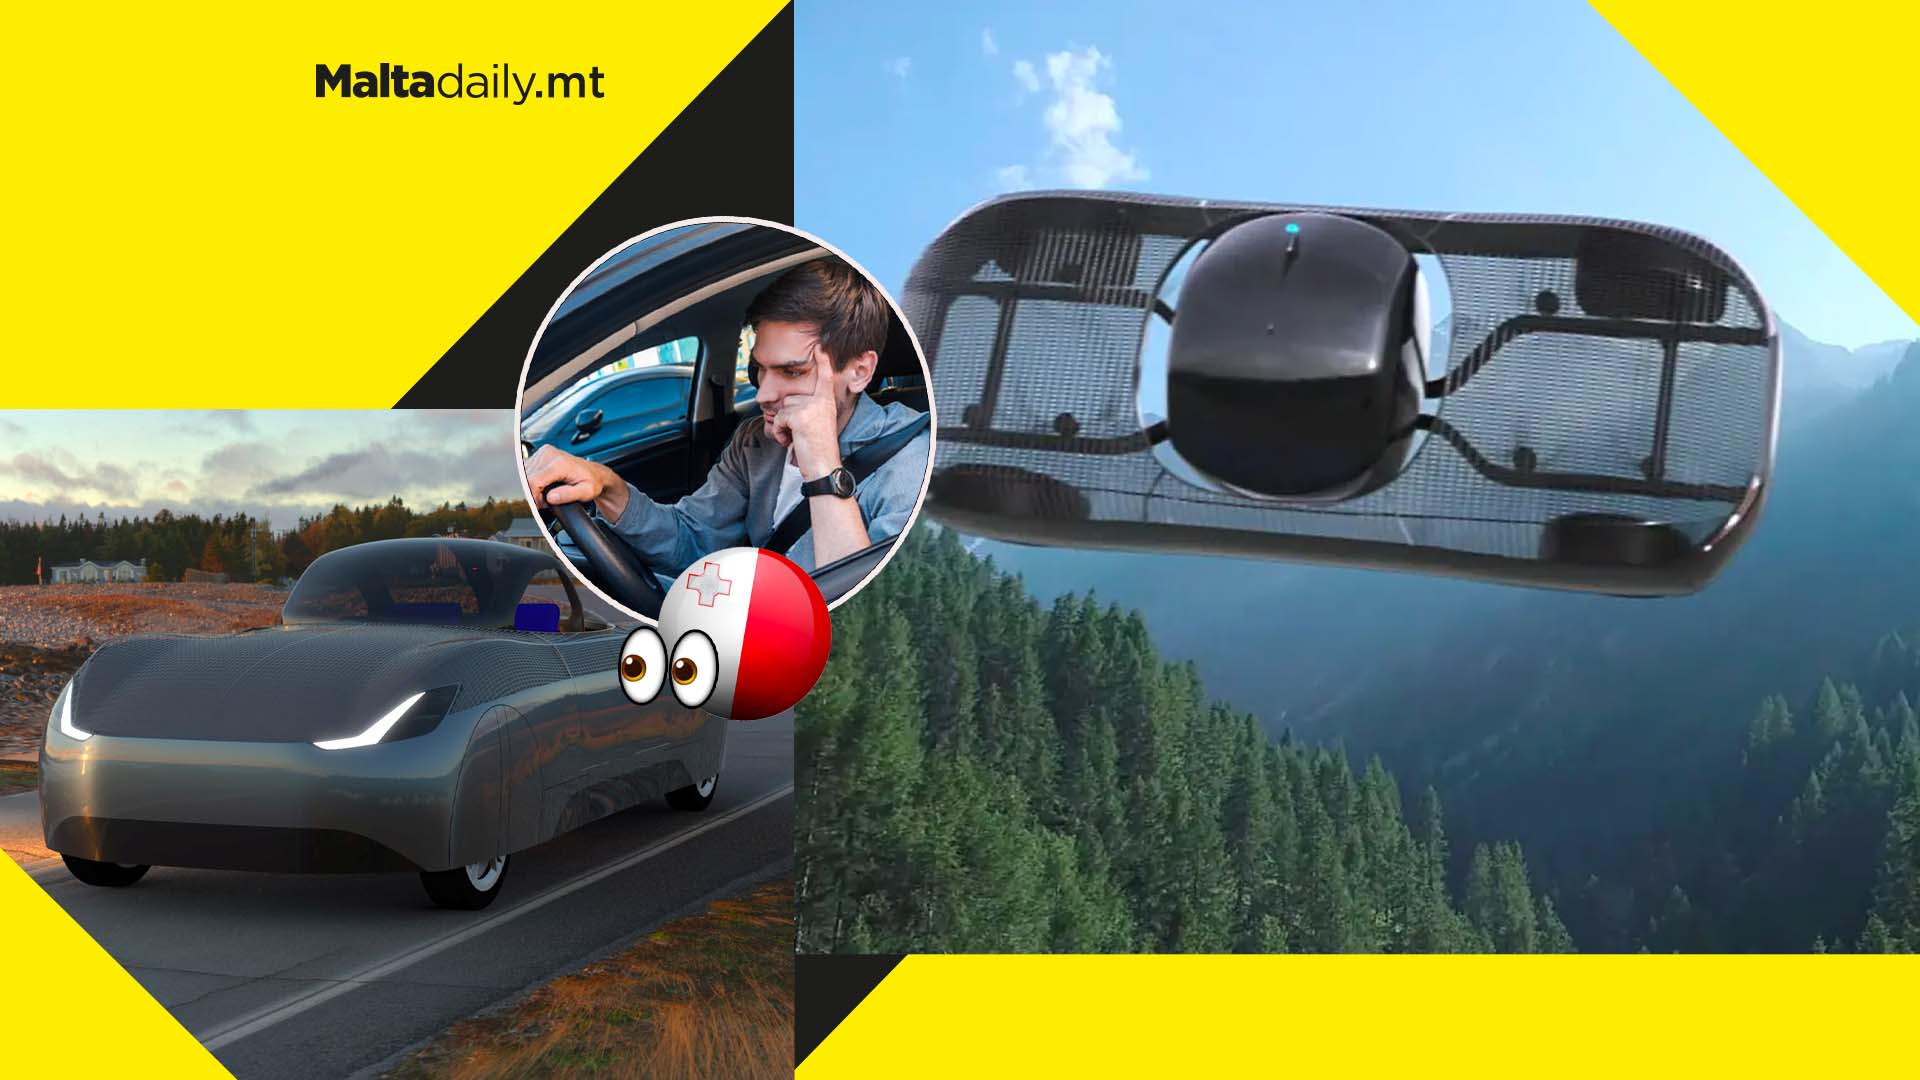 Could the world’s first flying car solve Malta’s traffic problems? Probably not